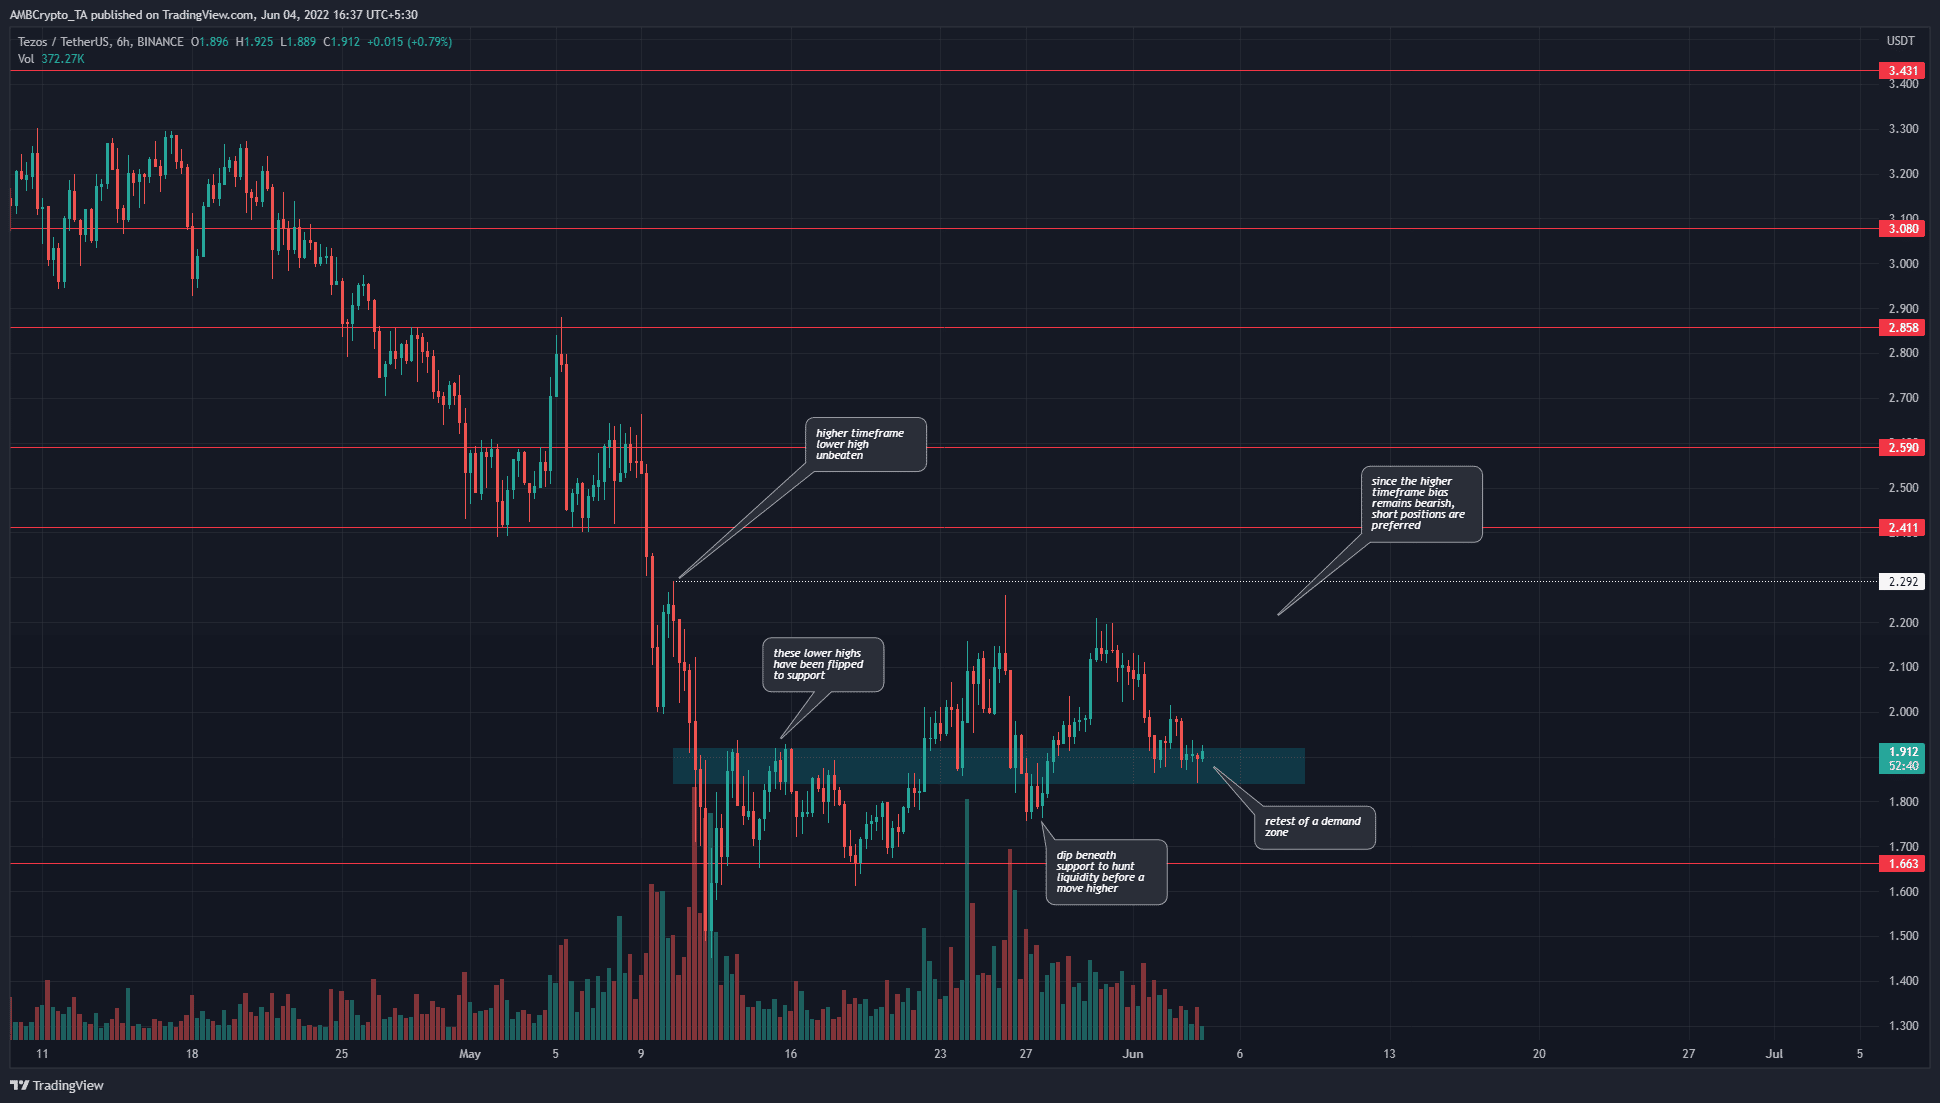 Tezos shows a bearish market structure and a possible trade opportunity